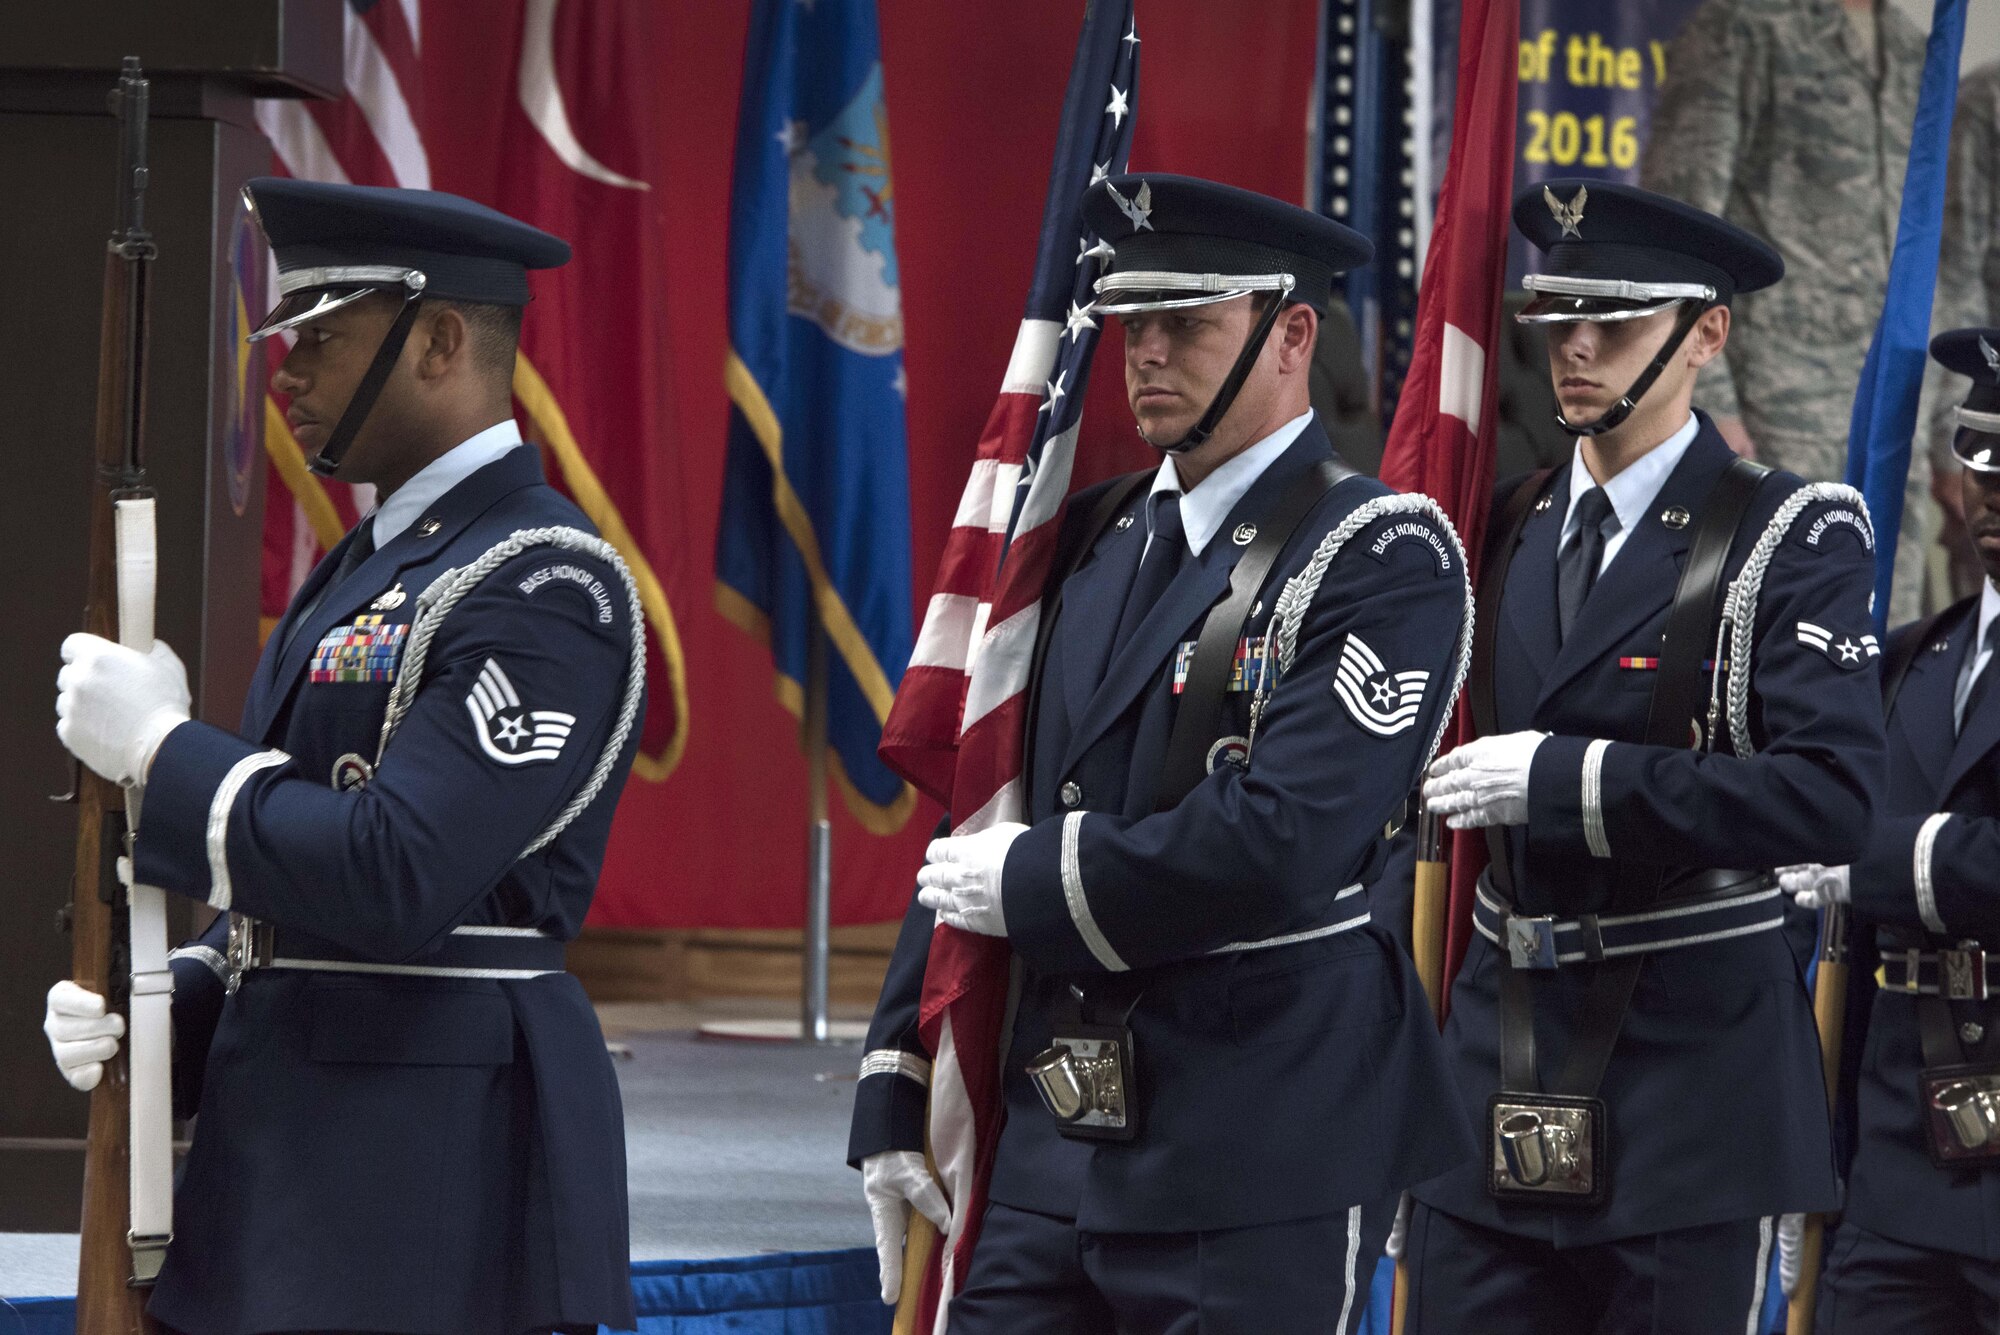 The Incirlik Air Base Honor Guard participates in the 39th Logistics Readiness Squadron change of command June 29, 2017, at Incirlik Air Base, Turkey. Lt. Col. Phillip Wheeler, 39th Logistics Readiness Squadron outgoing commander, relinquished command to Maj. Matthew Shaw, incoming 39th LRS commander. (U.S. Air Force photo by Airman 1st Class Kristan Campbell)